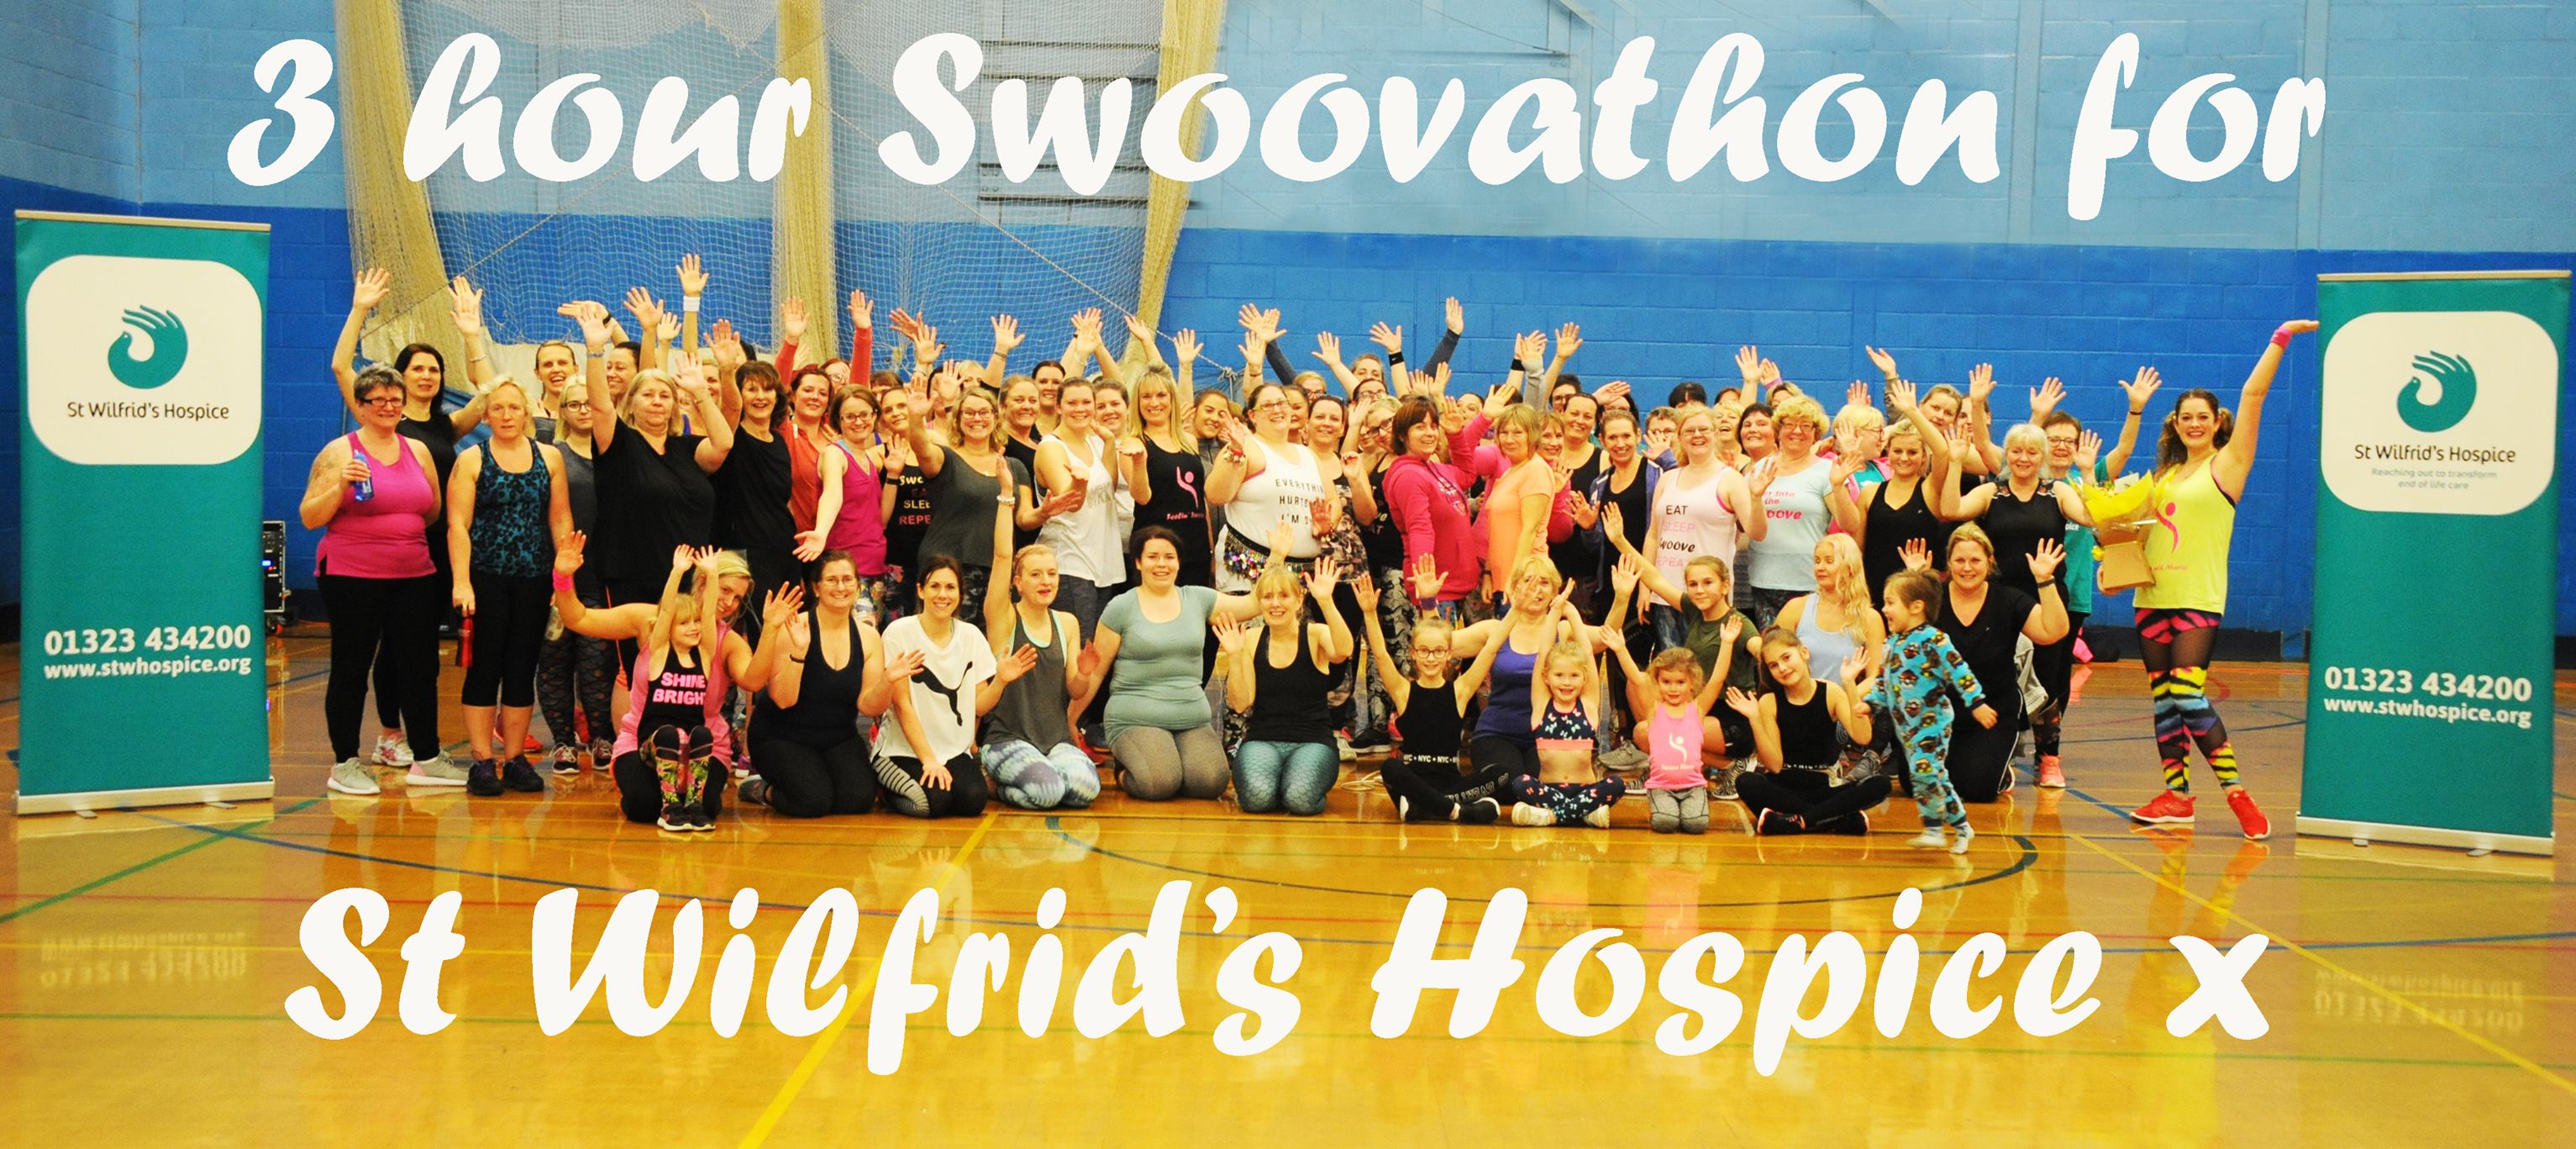 3 hr Swoovathon for St Wilfred's Hospice